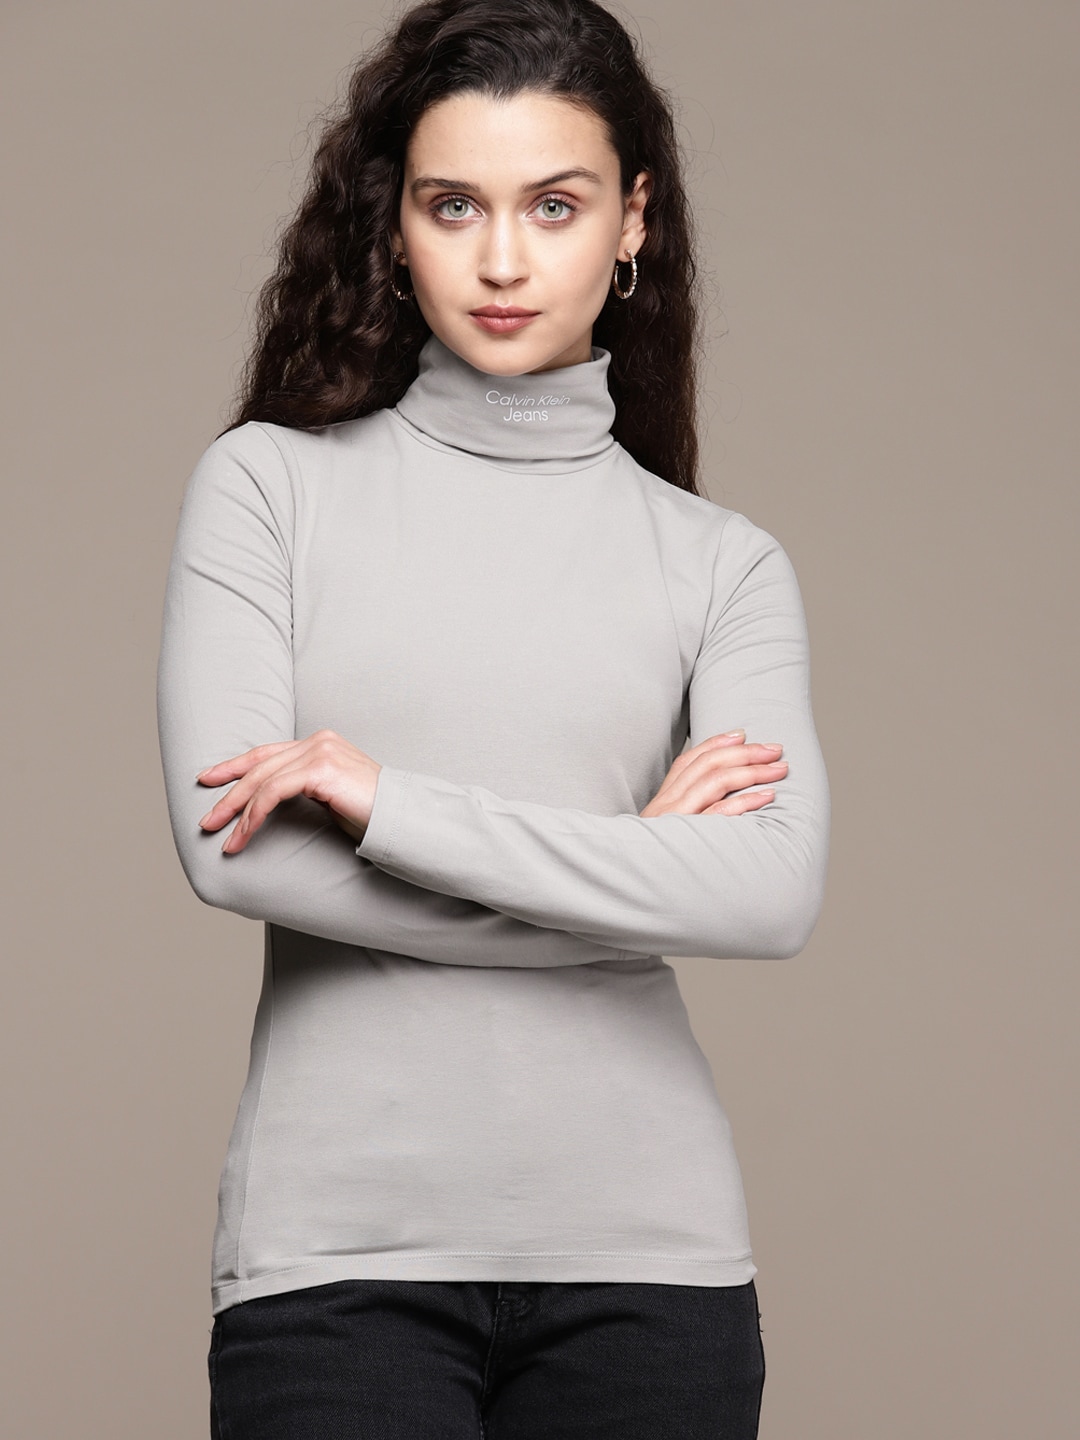 Calvin Klein Jeans Turtle Neck Fitted Top Price in India, Full  Specifications & Offers 